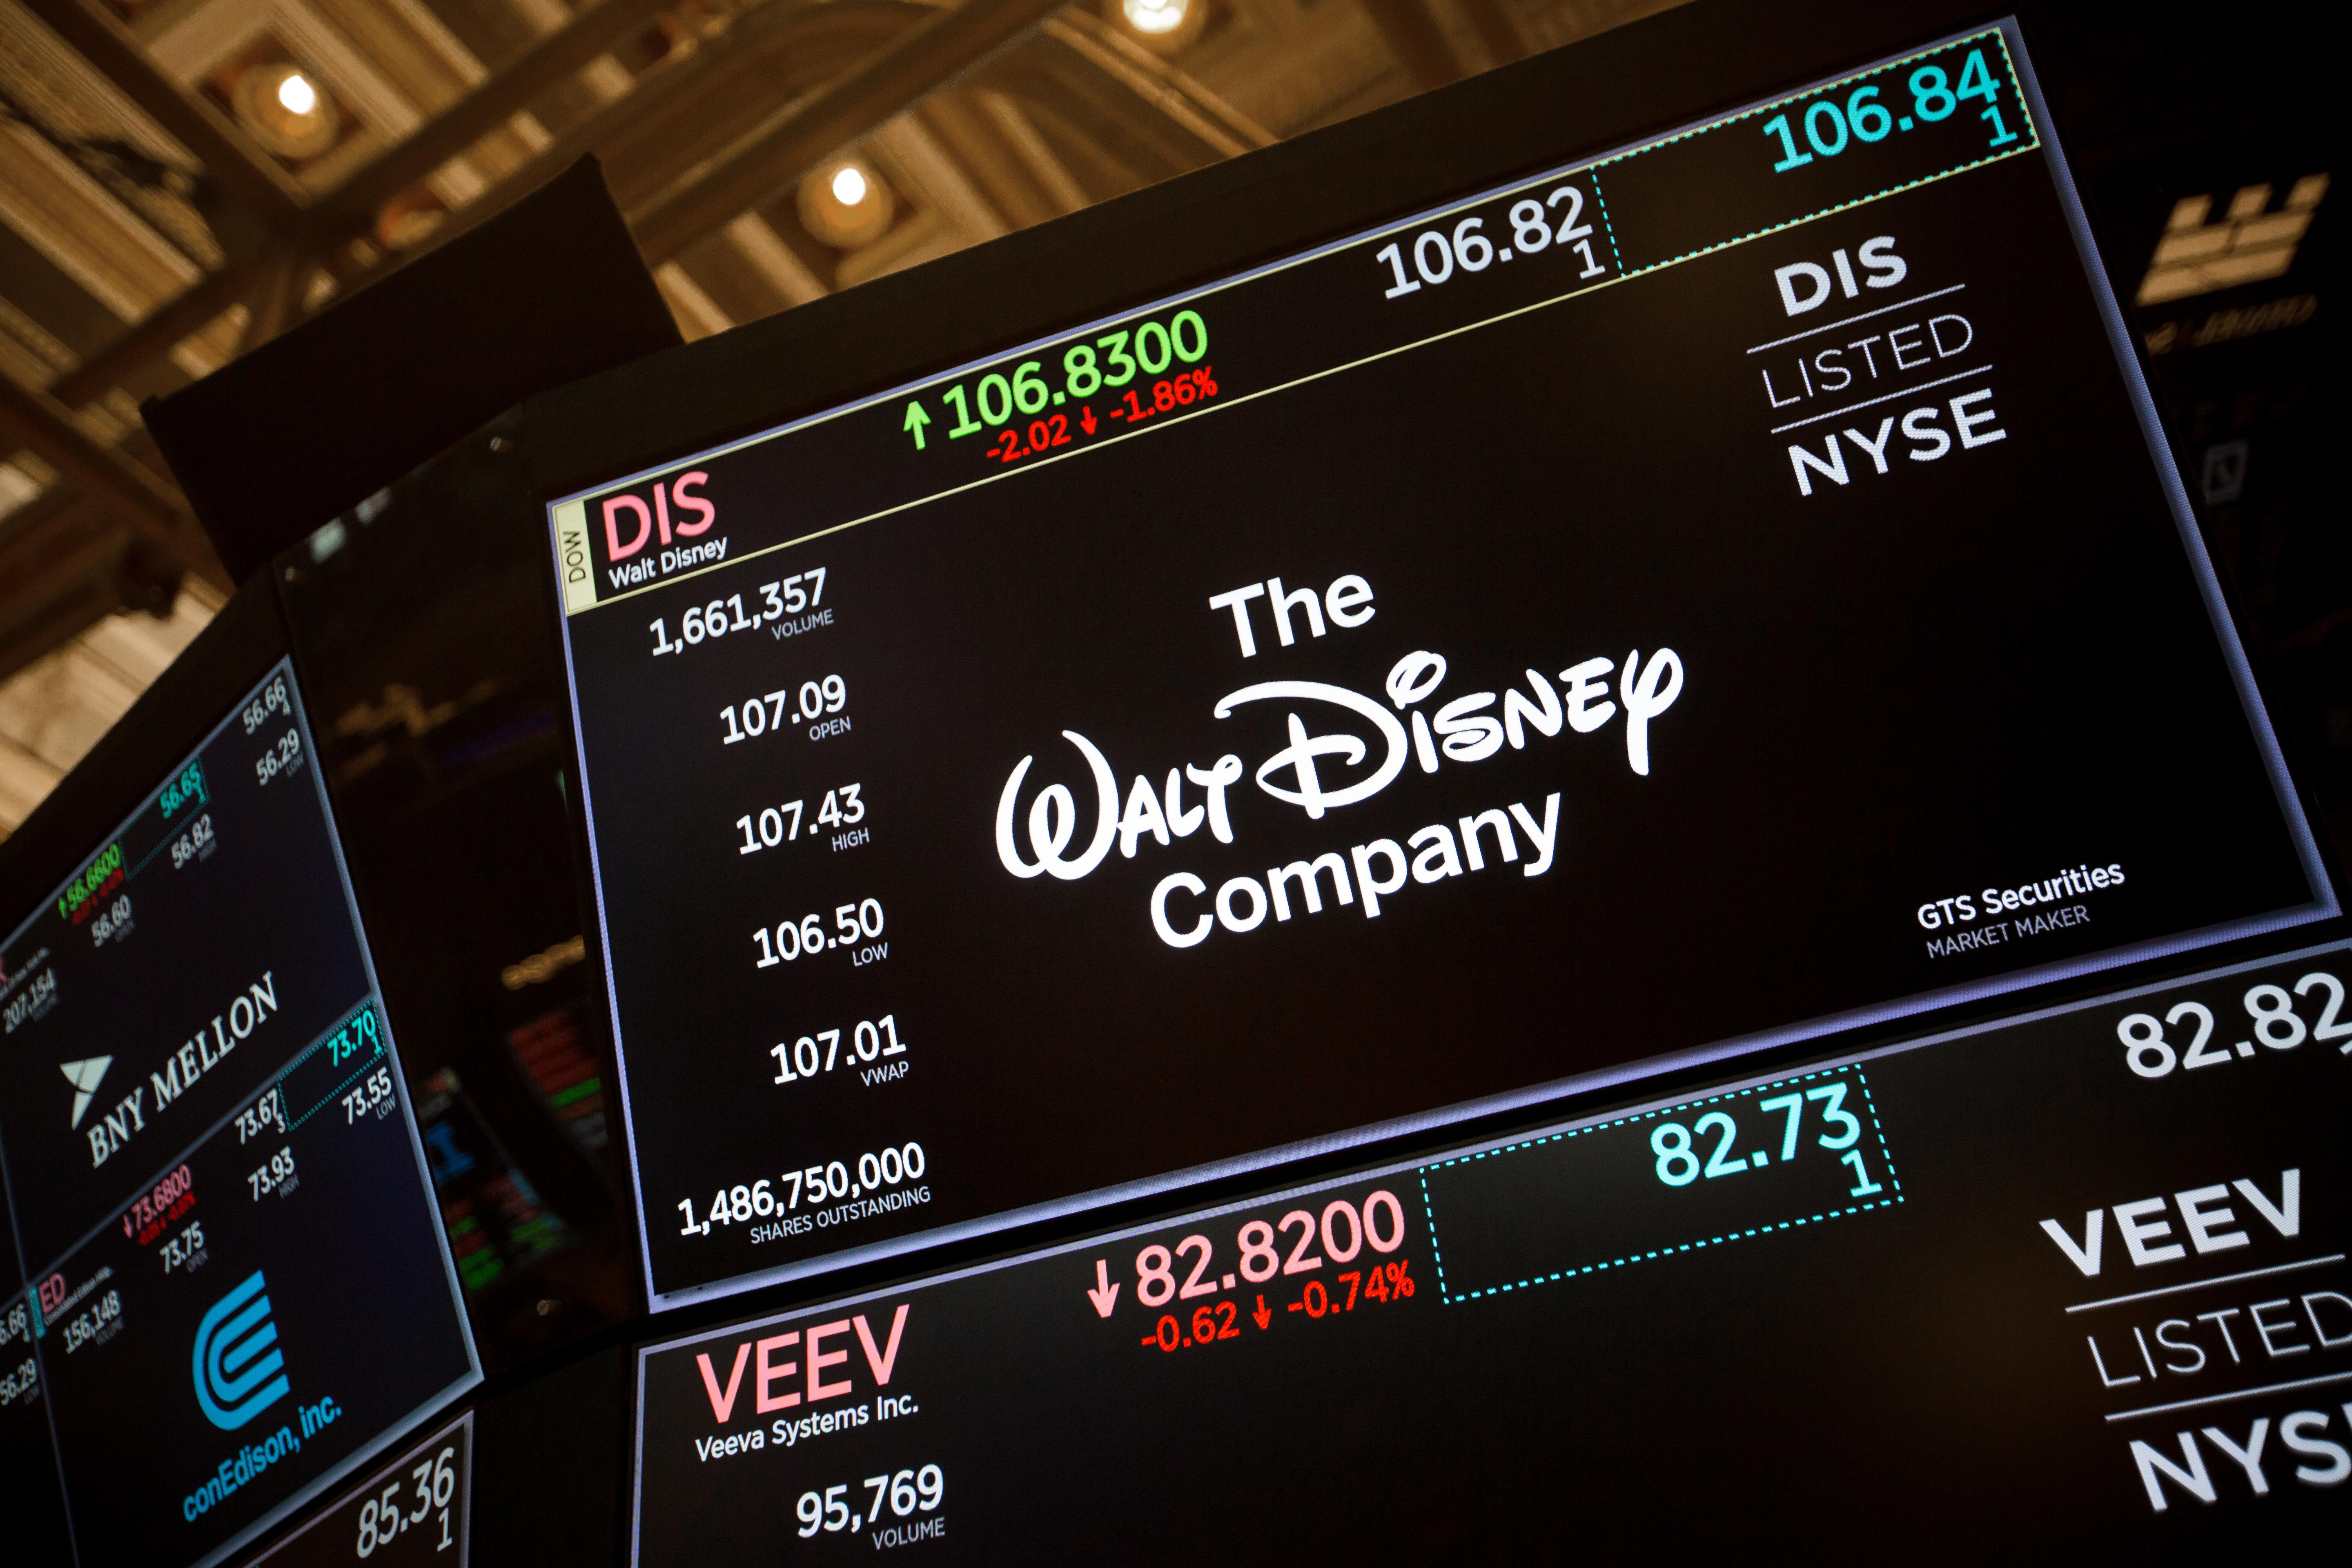 Disney (NYSEDIS) share price down 2 this week after unveiling new